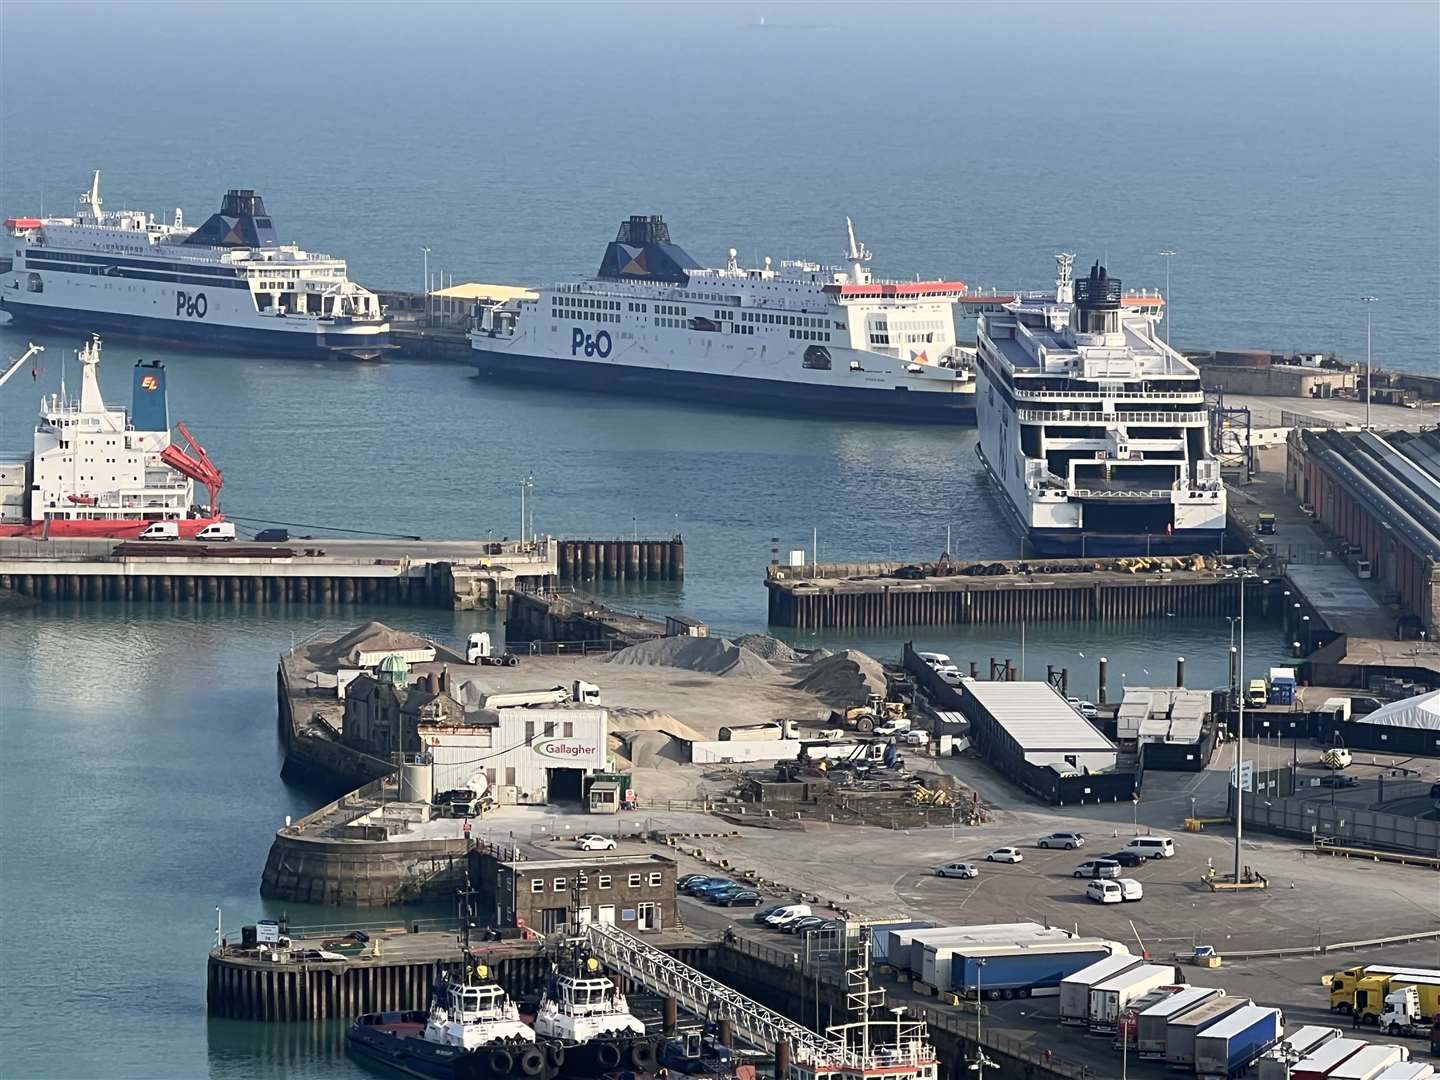 The port is expecting to welcome 140,000 passengers between Thursday and Sunday. Picture: Barry Goodwin